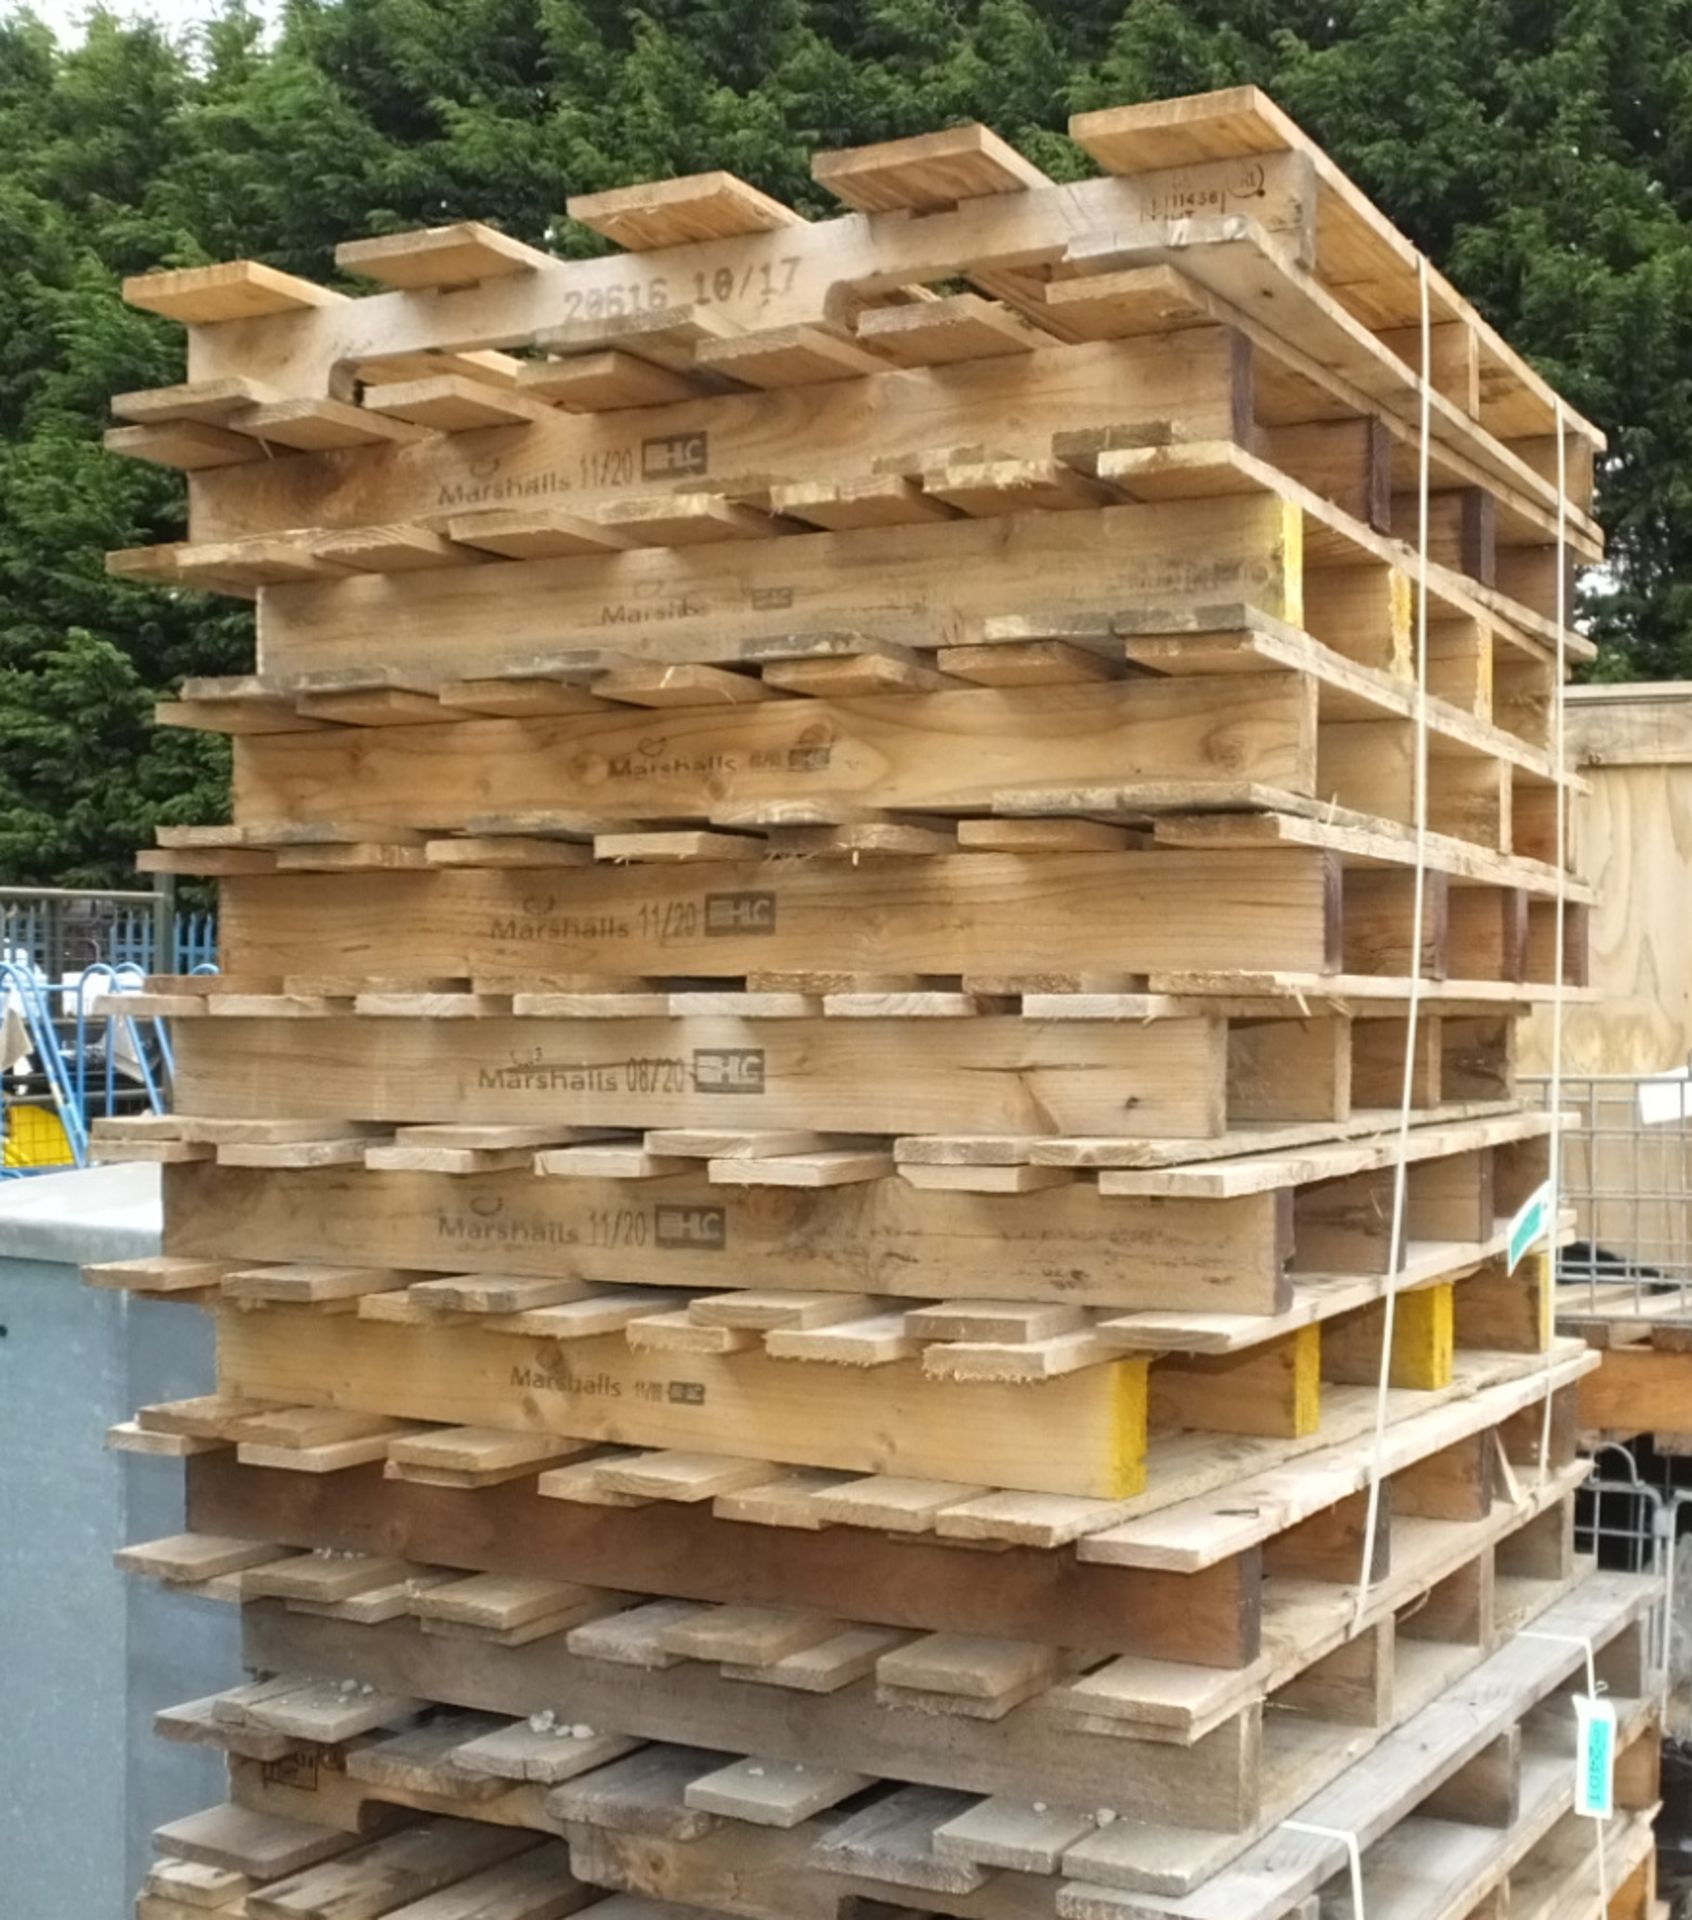 10x Wooden Pallets - Image 2 of 2